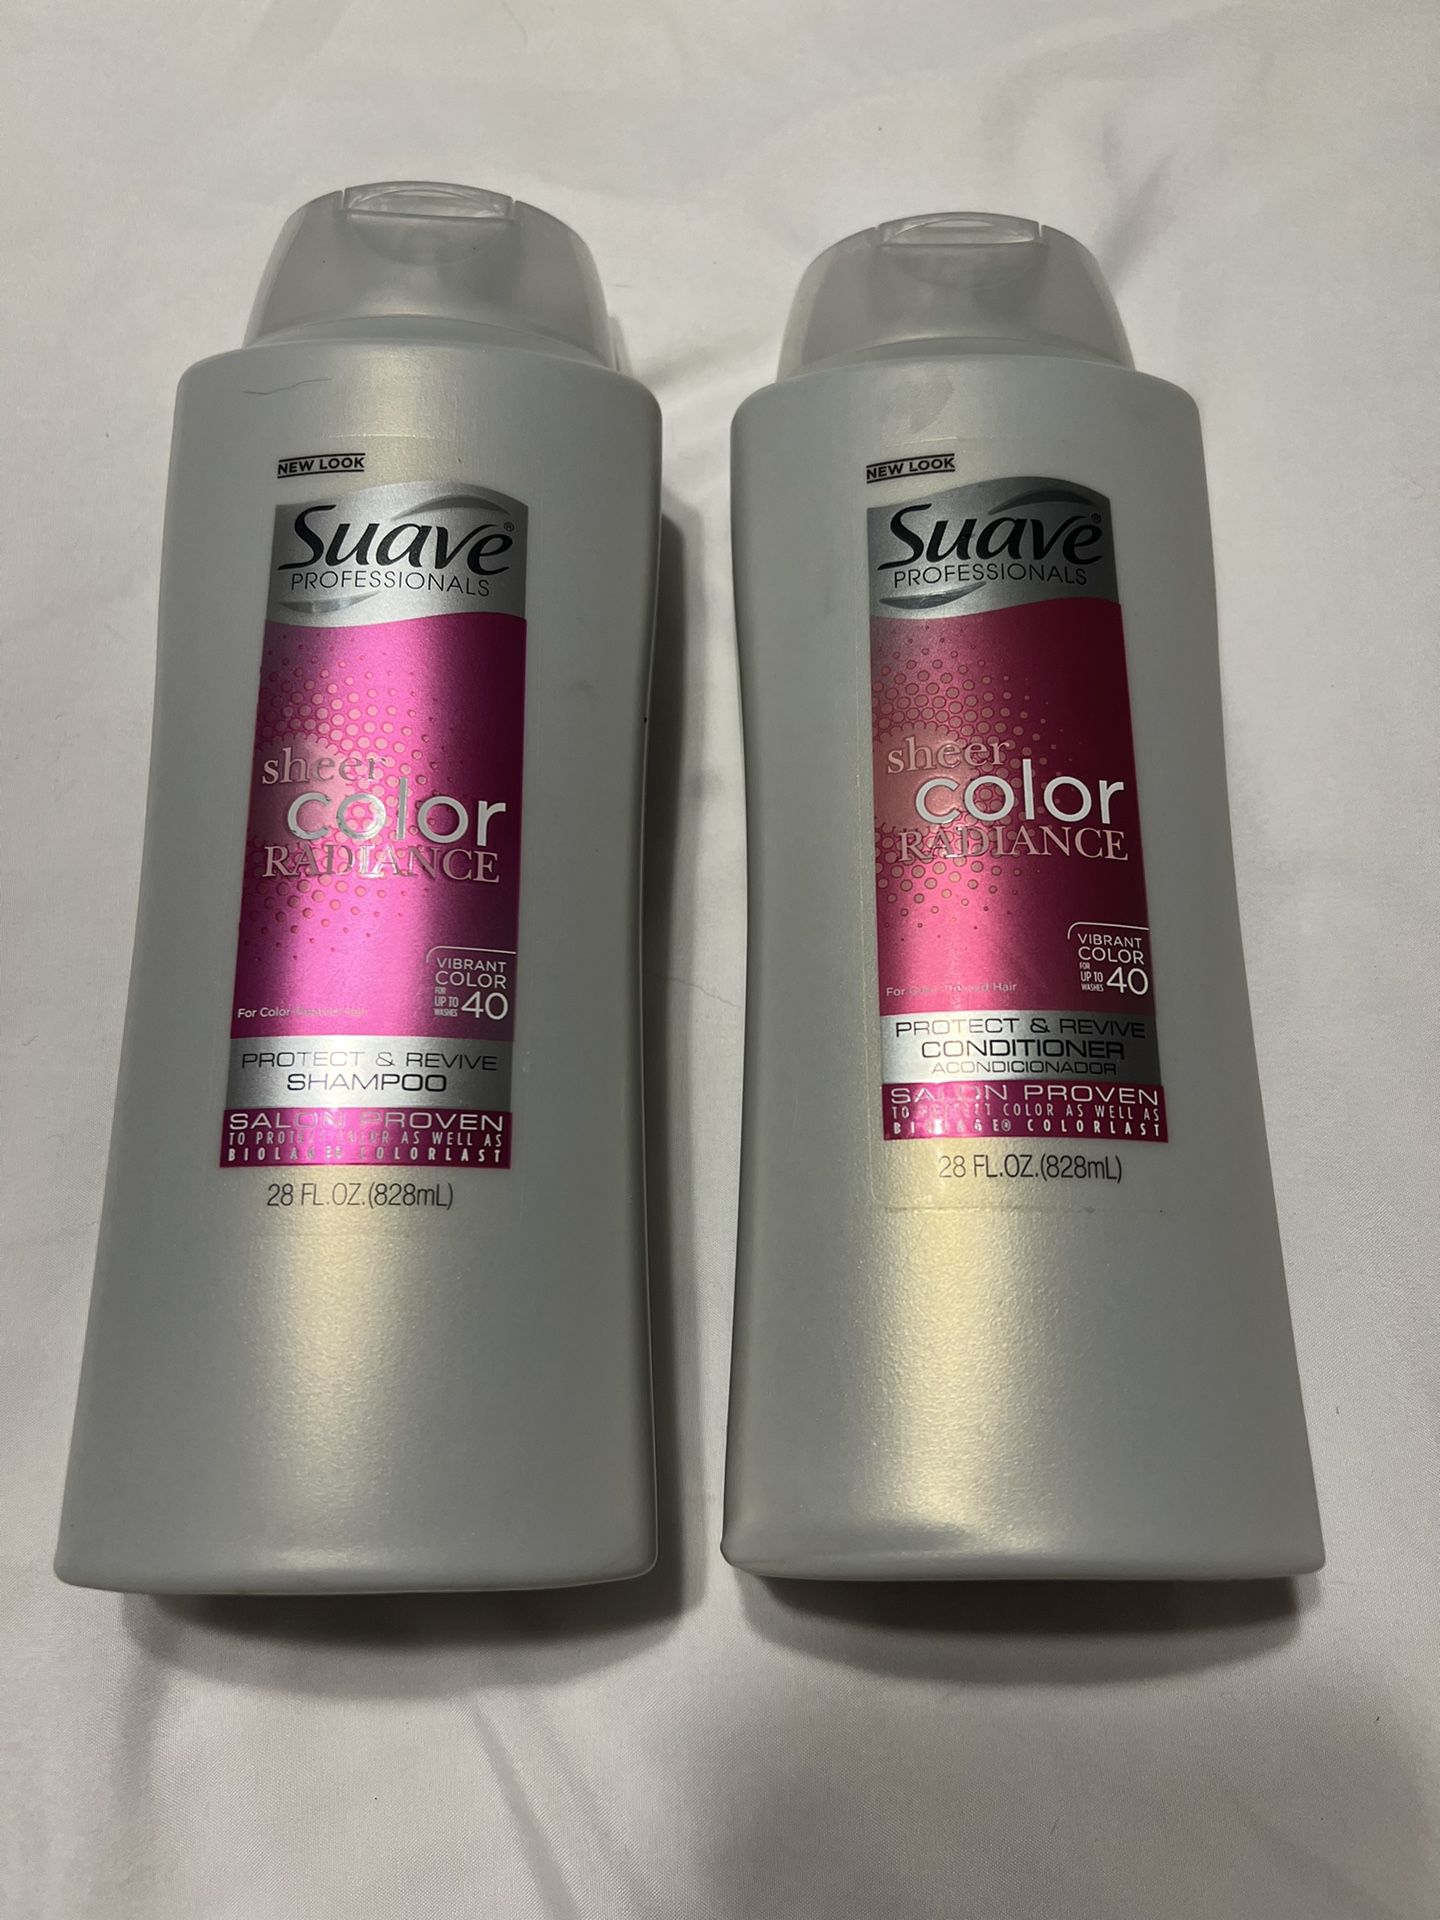 Suave Professionals Sheer Radiance Color Protection Shampoo & Conditioner *NEW*